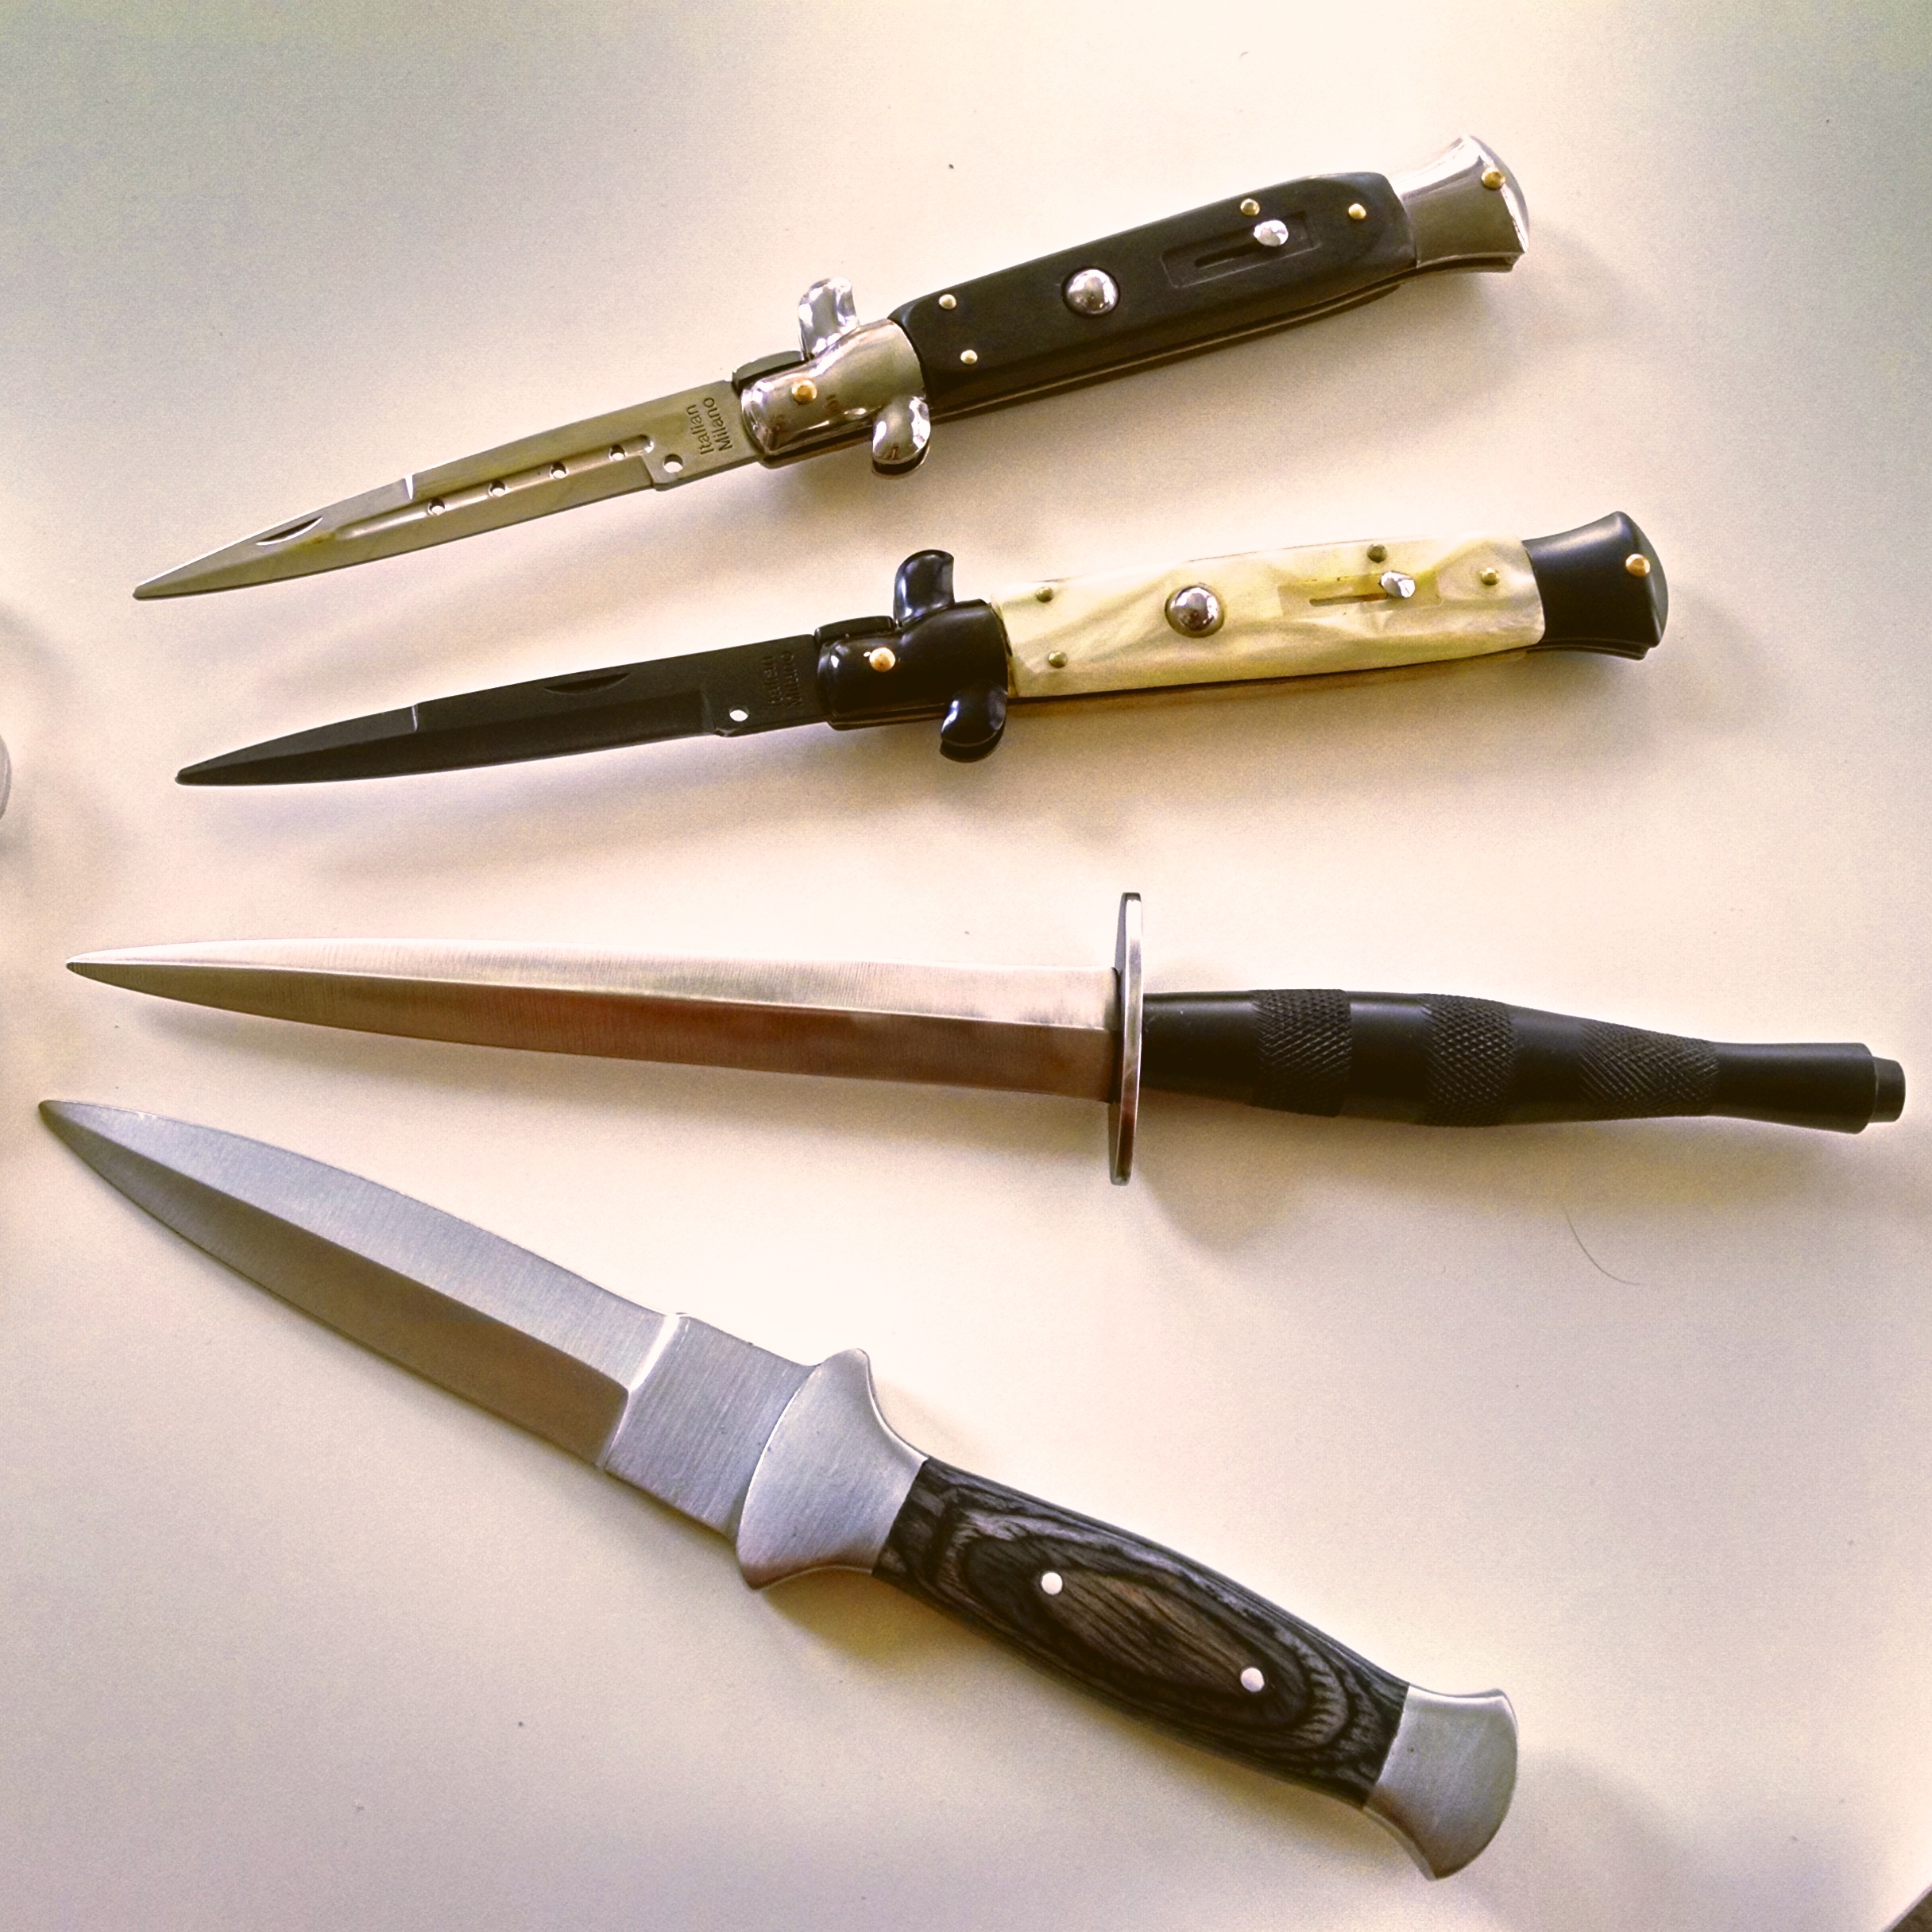 STAGE COMBAT KNIVES